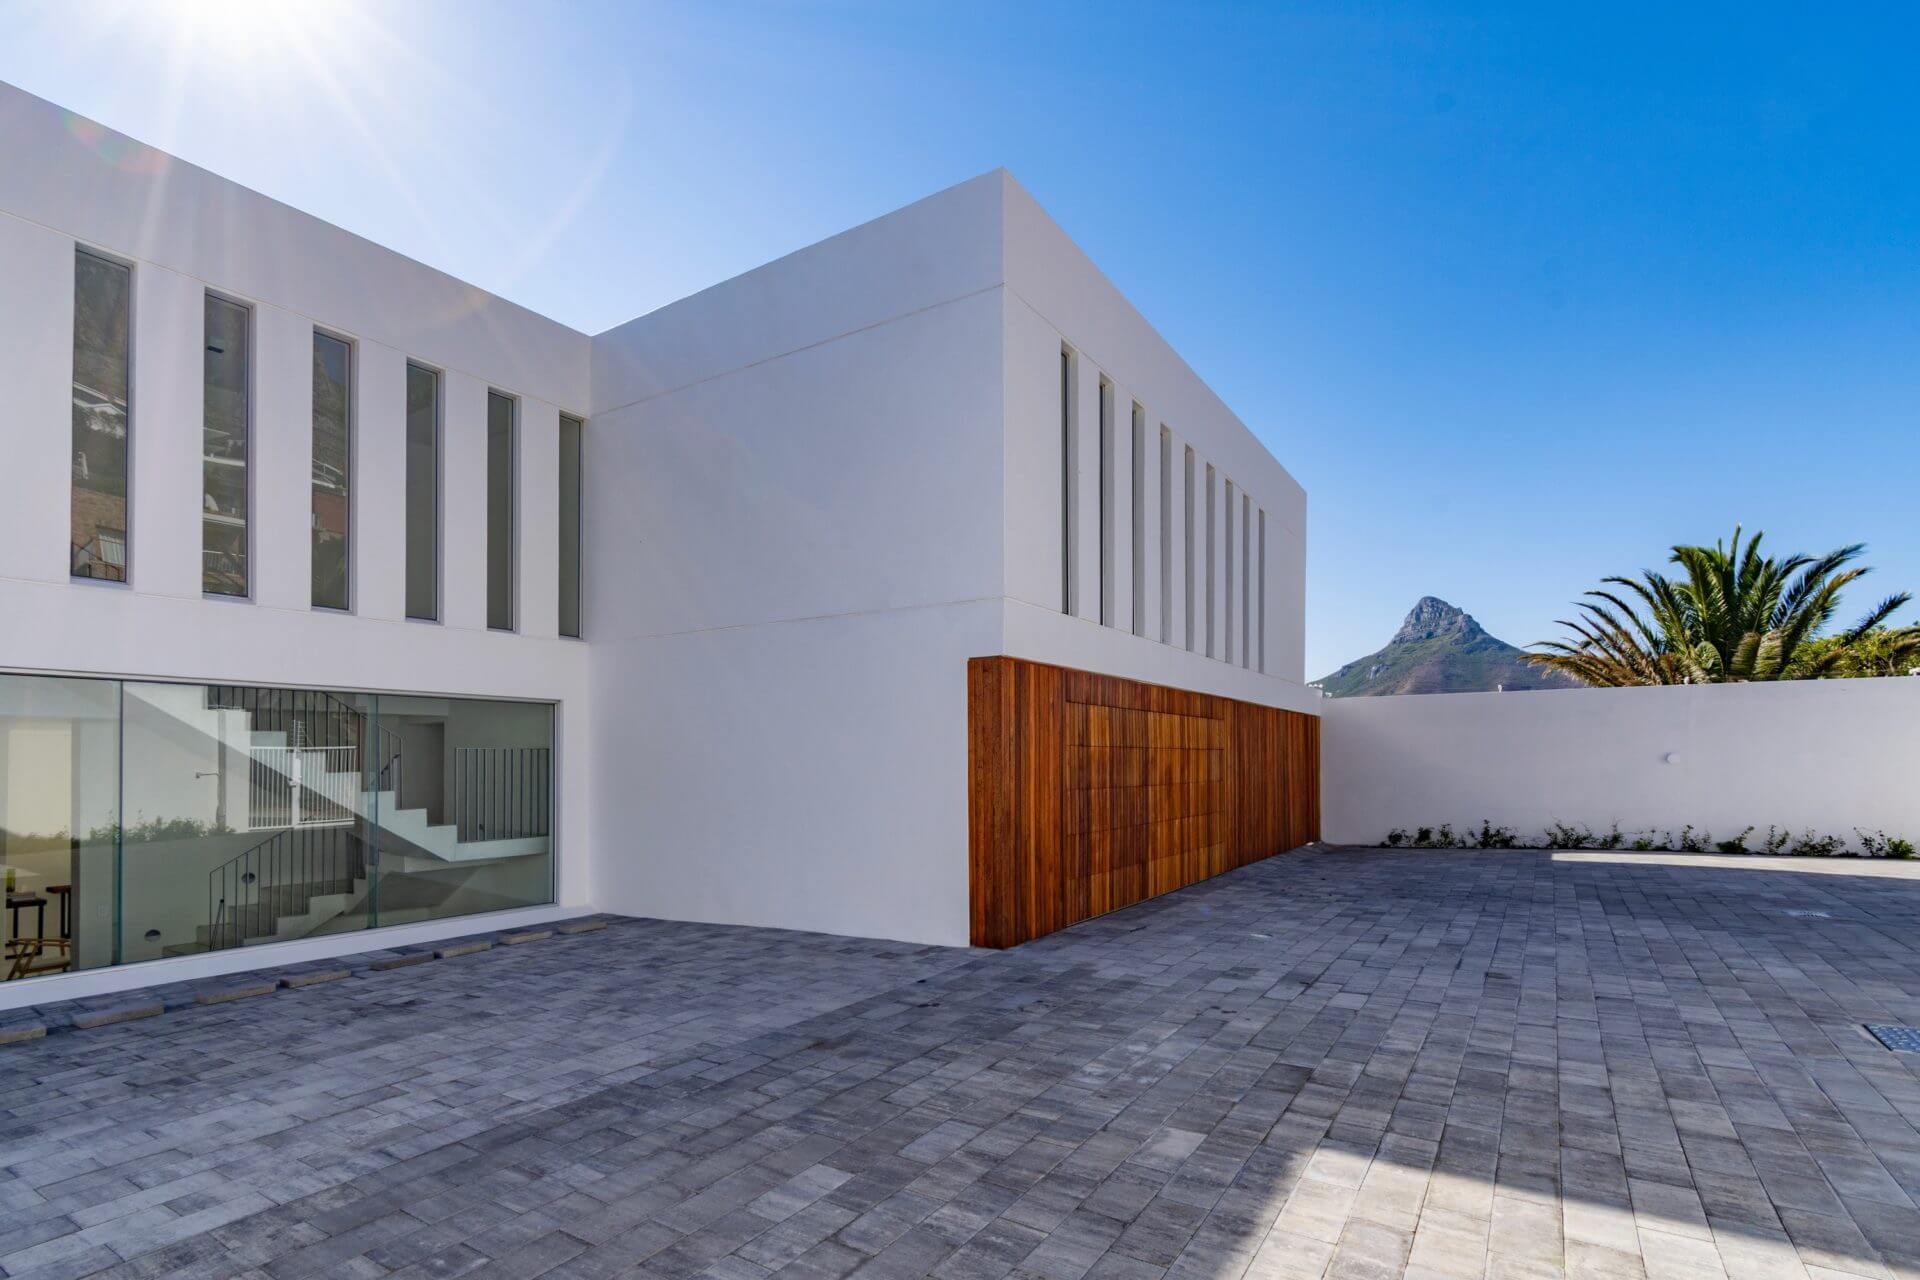 Photo 25 of Villa Ibiza accommodation in Camps Bay, Cape Town with 8 bedrooms and 8 bathrooms